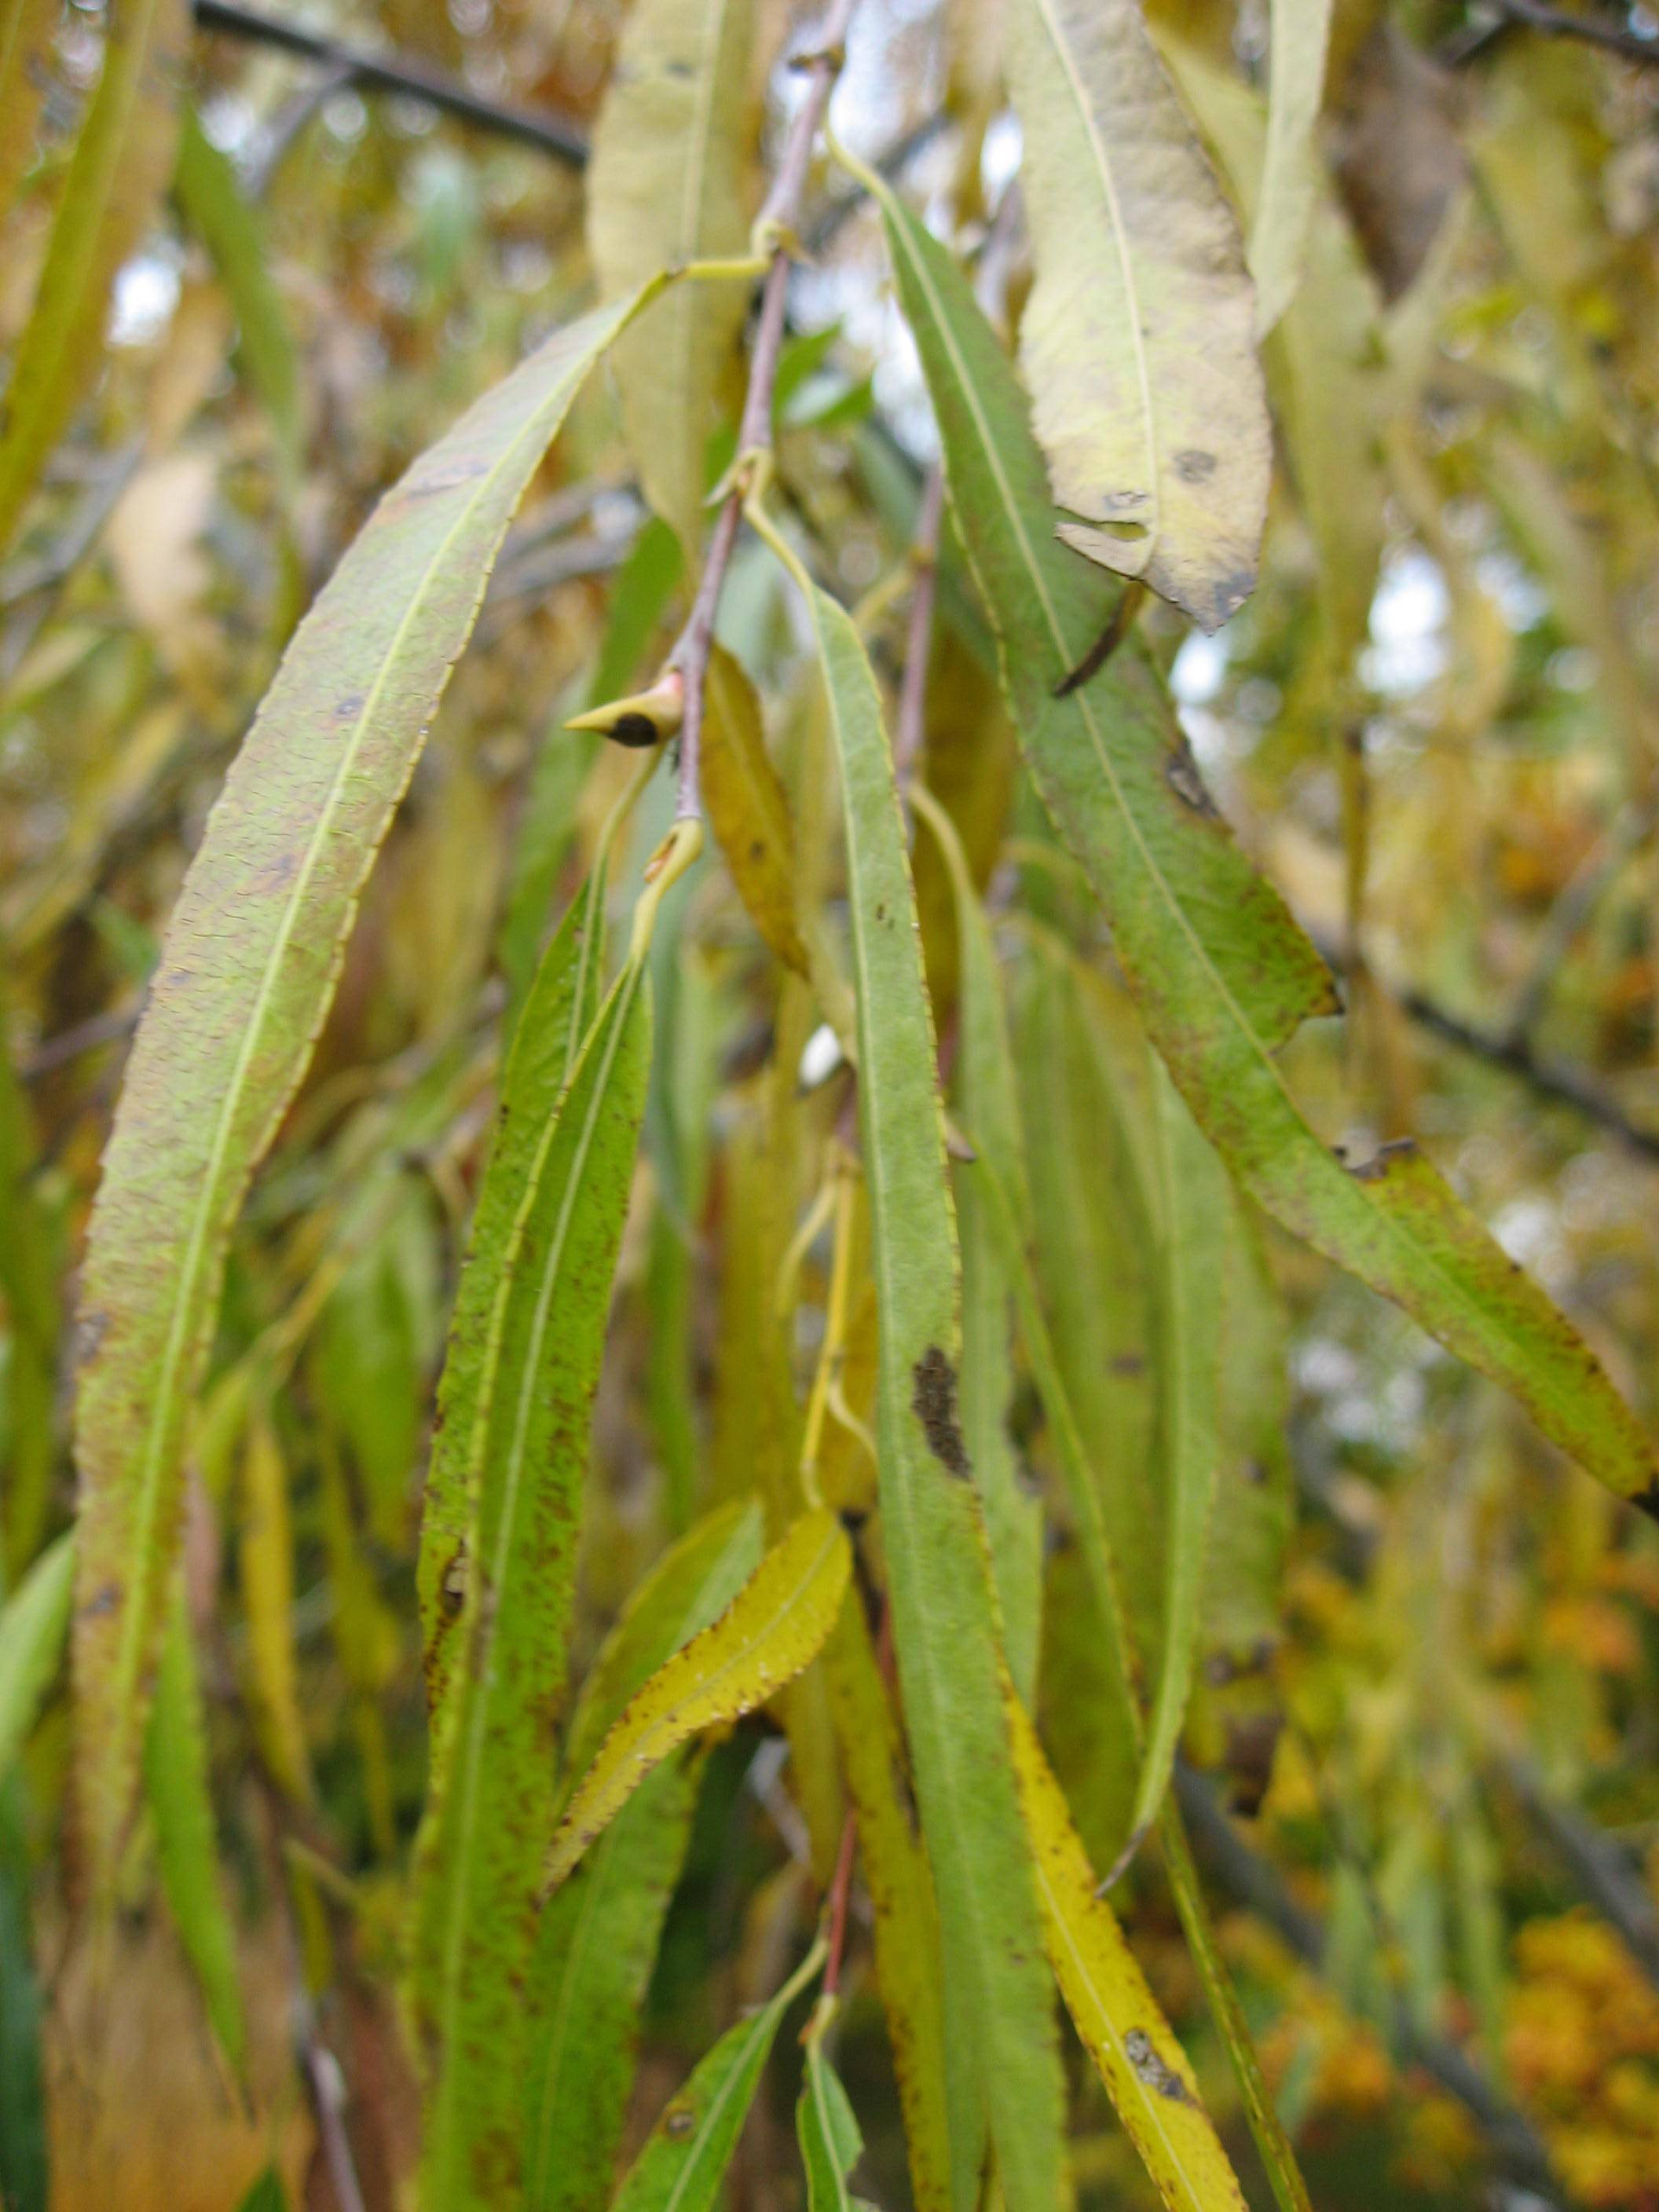 yellow-green leaves with yellow midrib and yellow-brown stems